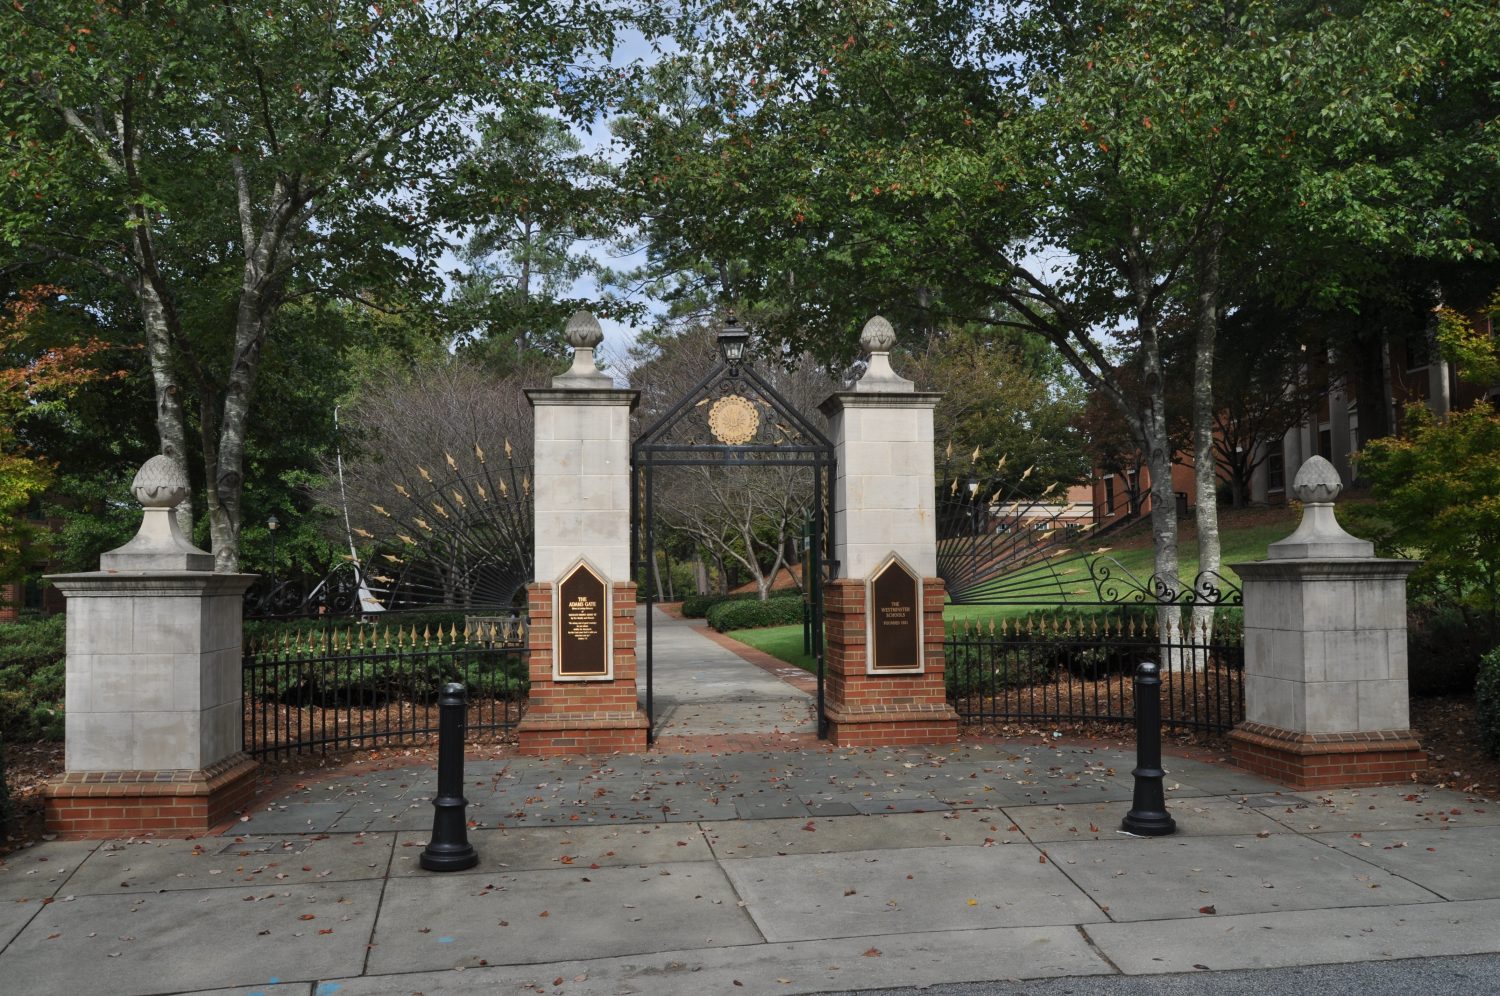 The Madeline D. Adams Gate, which features Westminsters seal, marks the entrance to Westminsters main pedestrian mall.